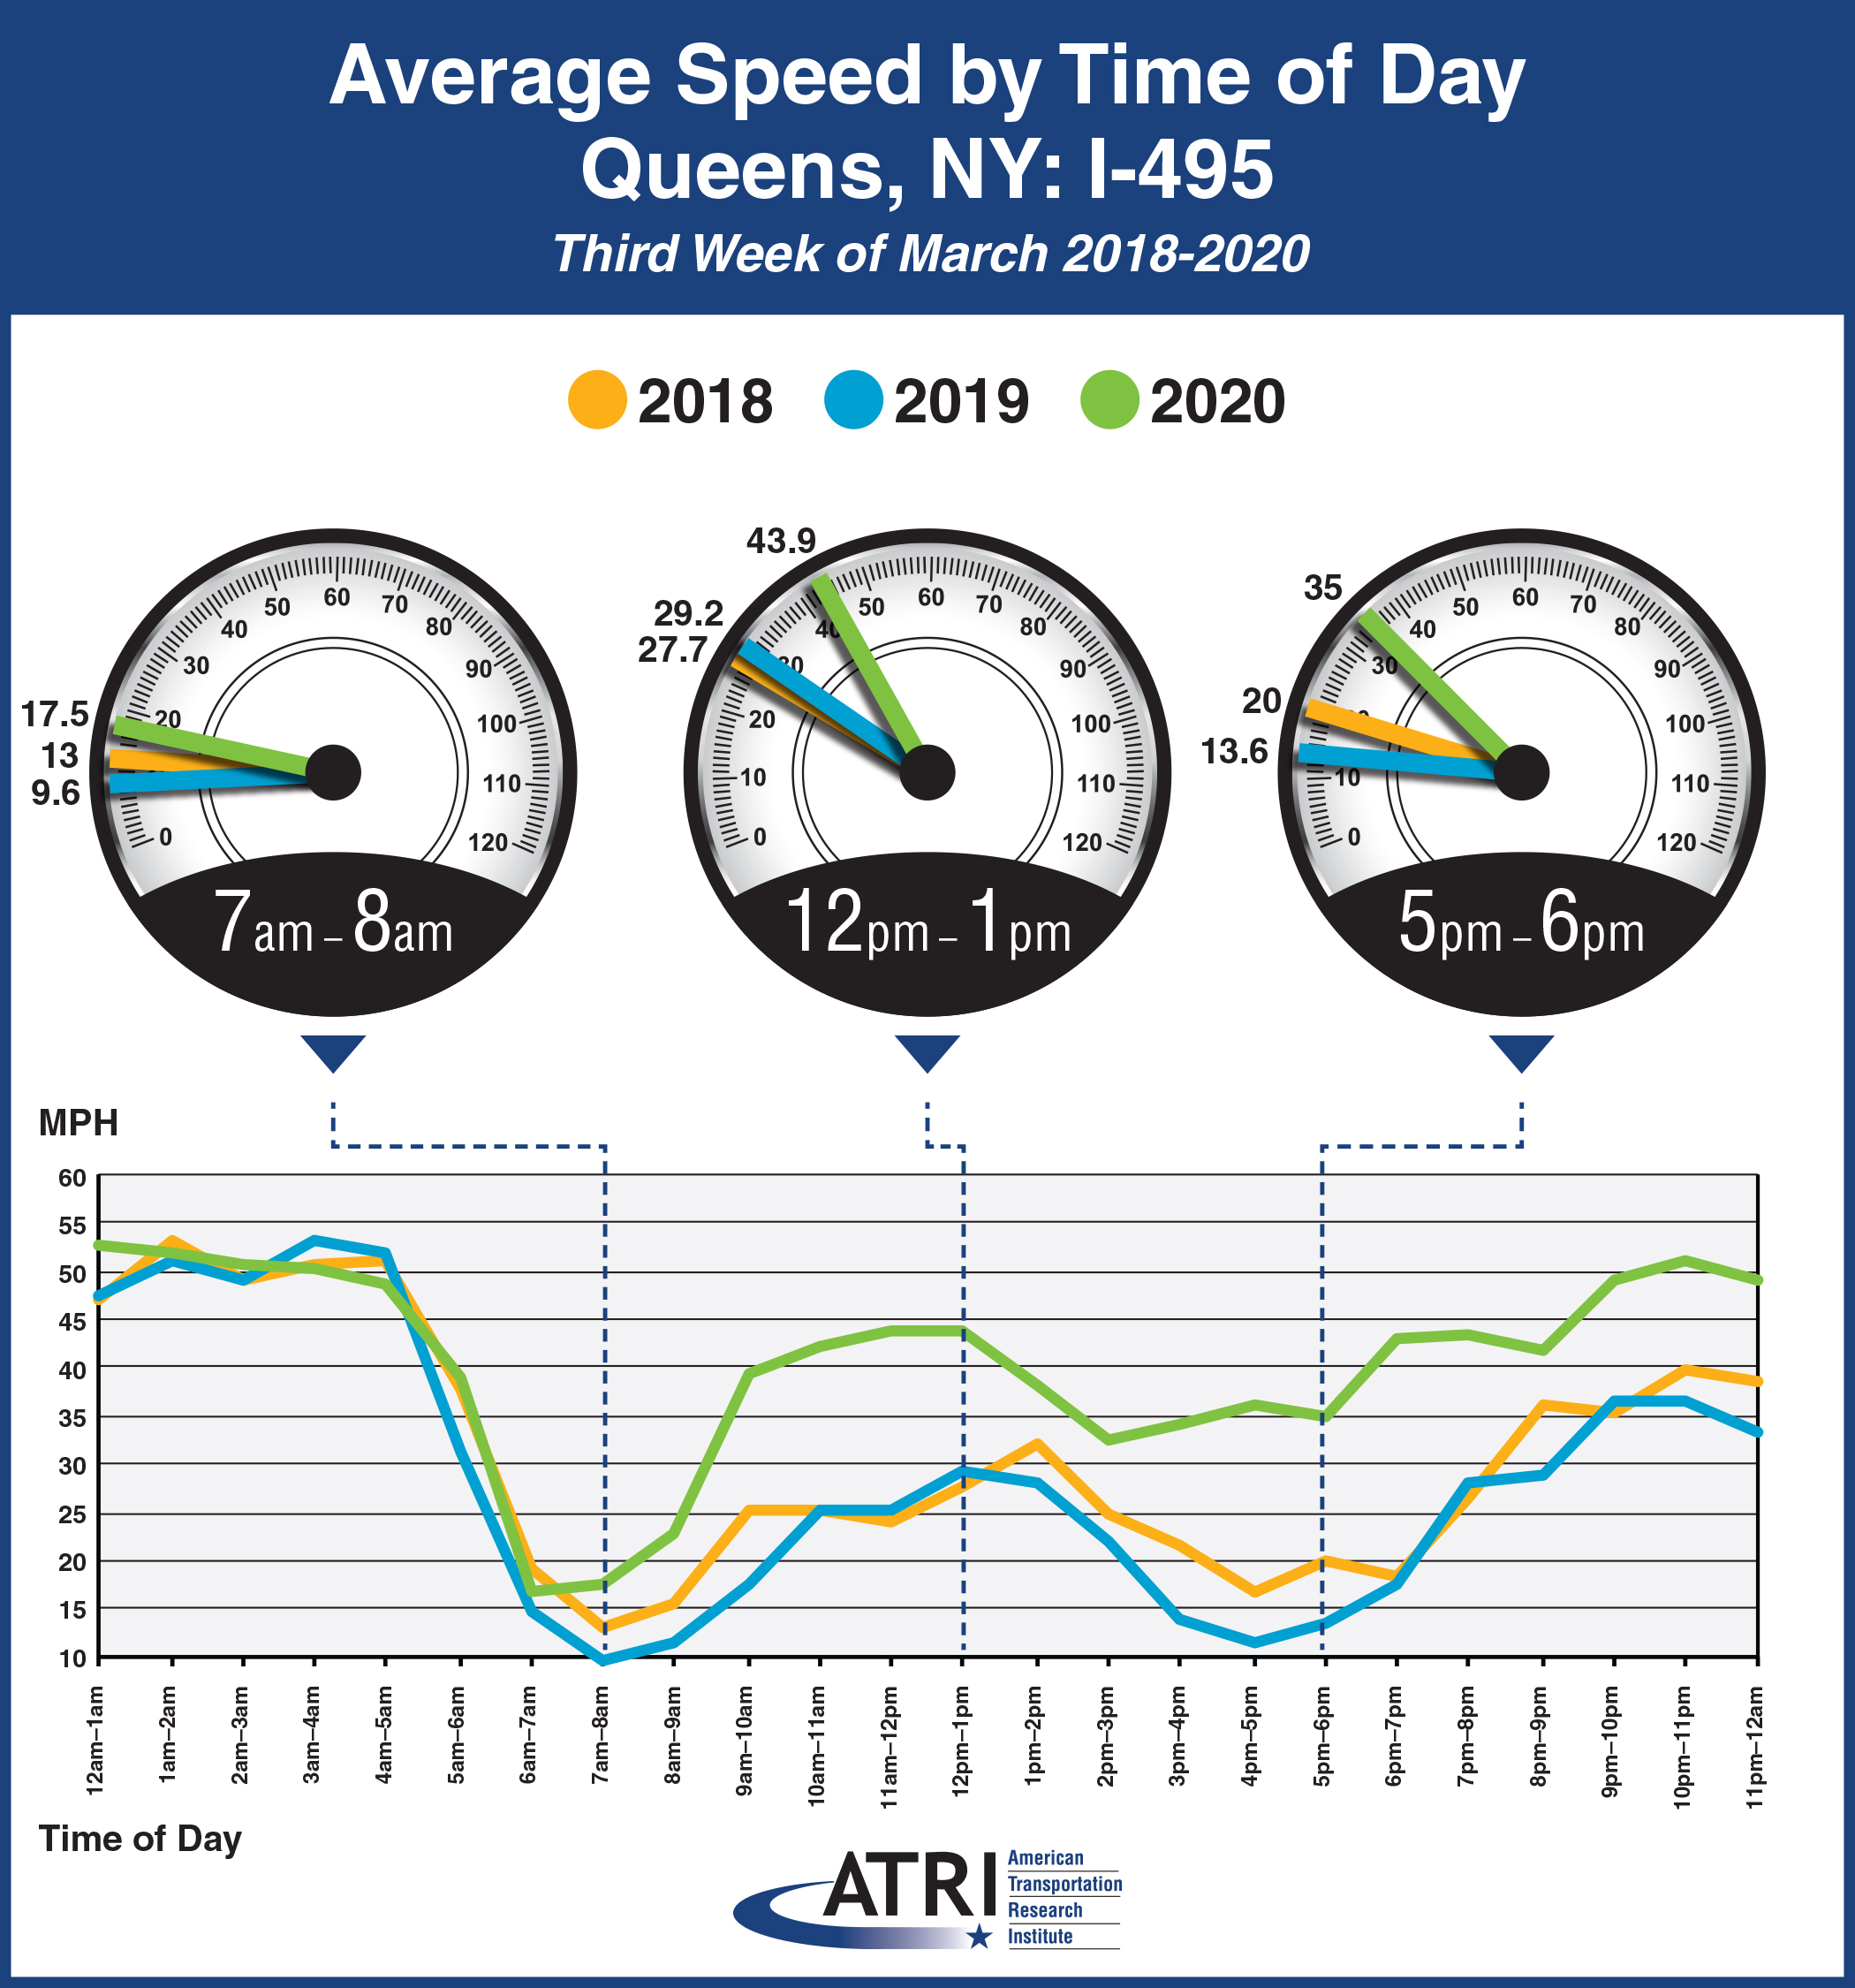 Avg. Speed by Time of Day Queens, NY: I-495